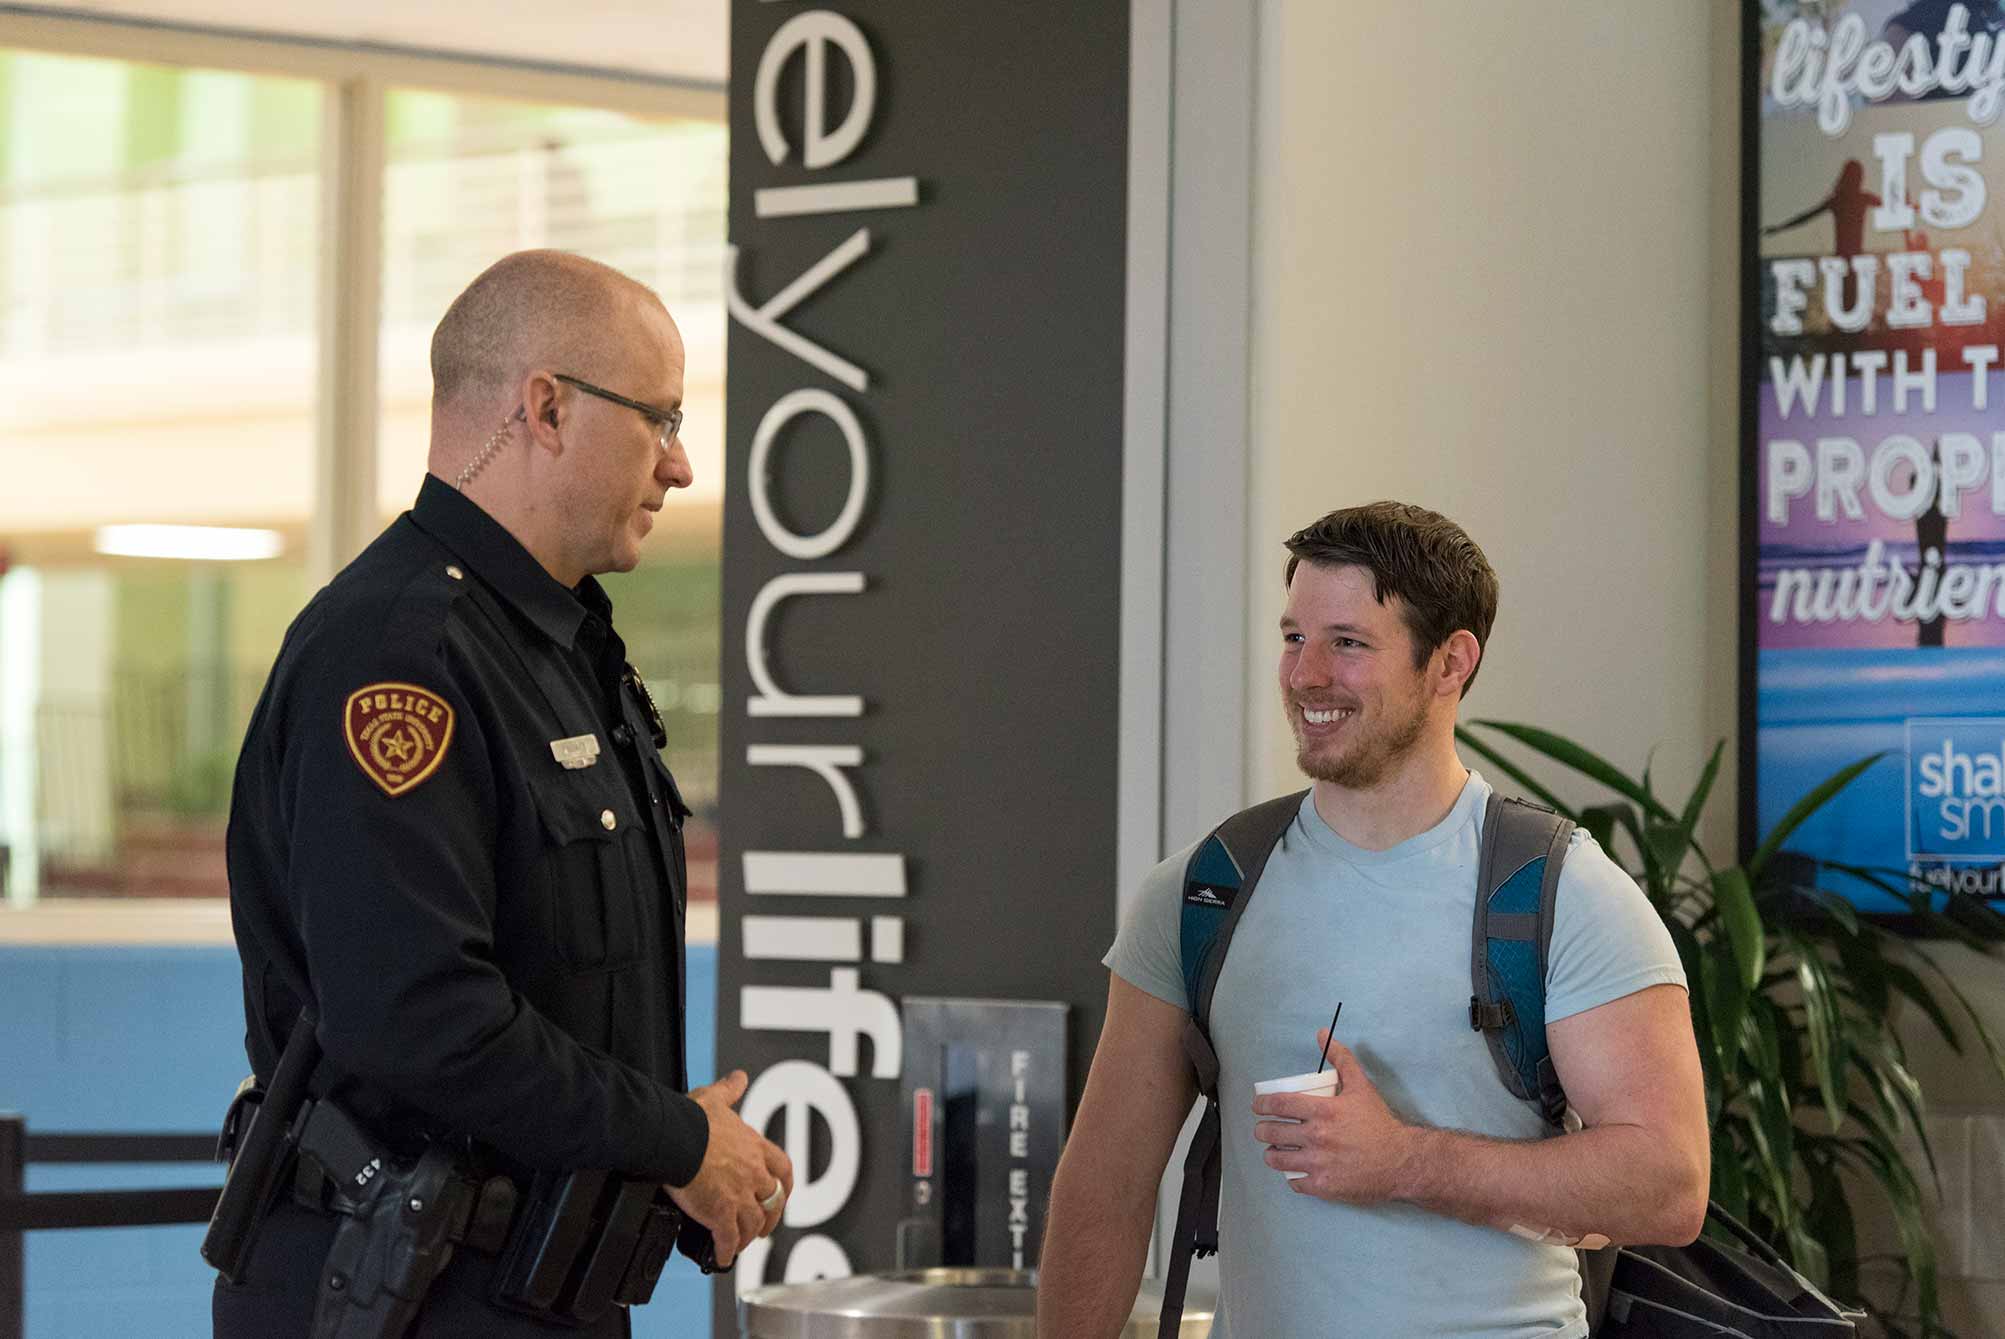 UPD Officer talking with a student